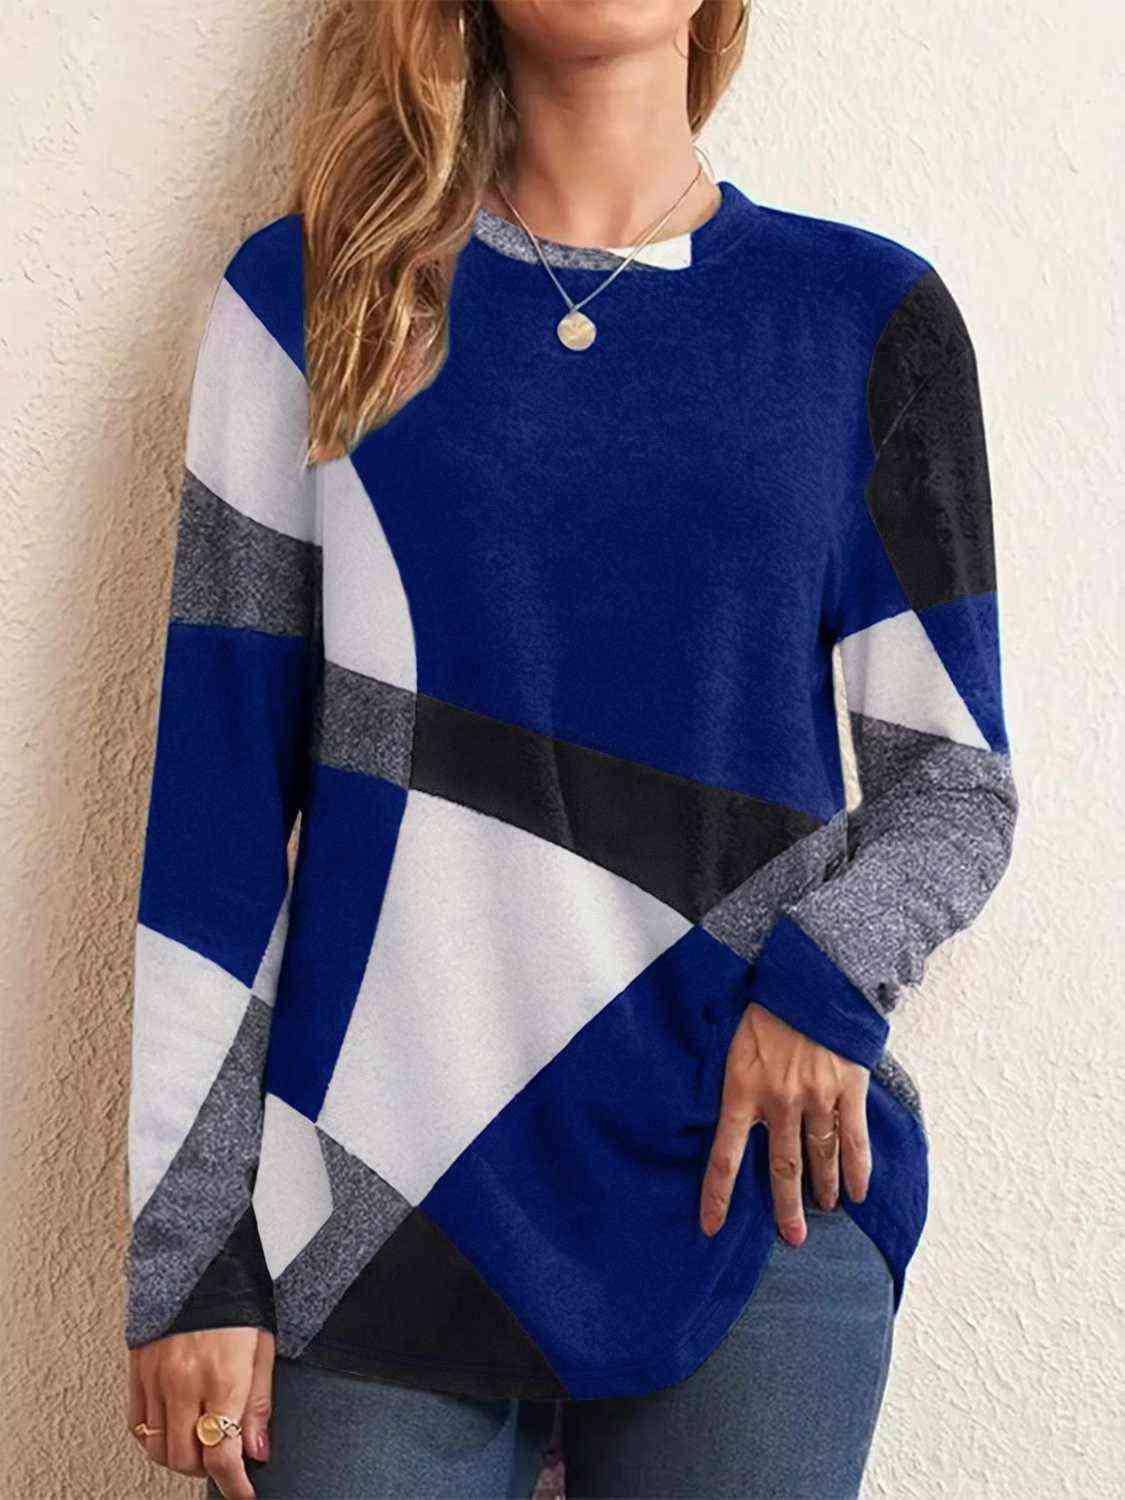 a woman wearing a blue and white sweater